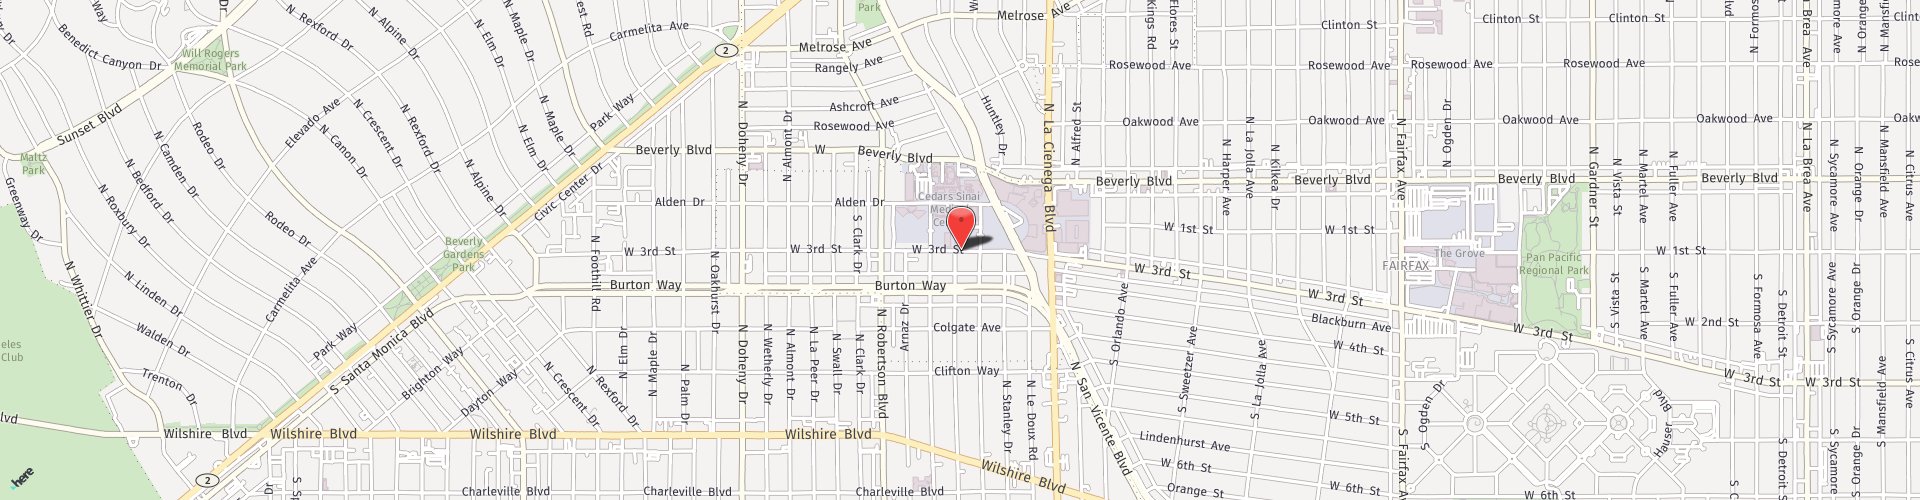 Location Map: 8631 W 3rd St Los Angeles, CA 90048